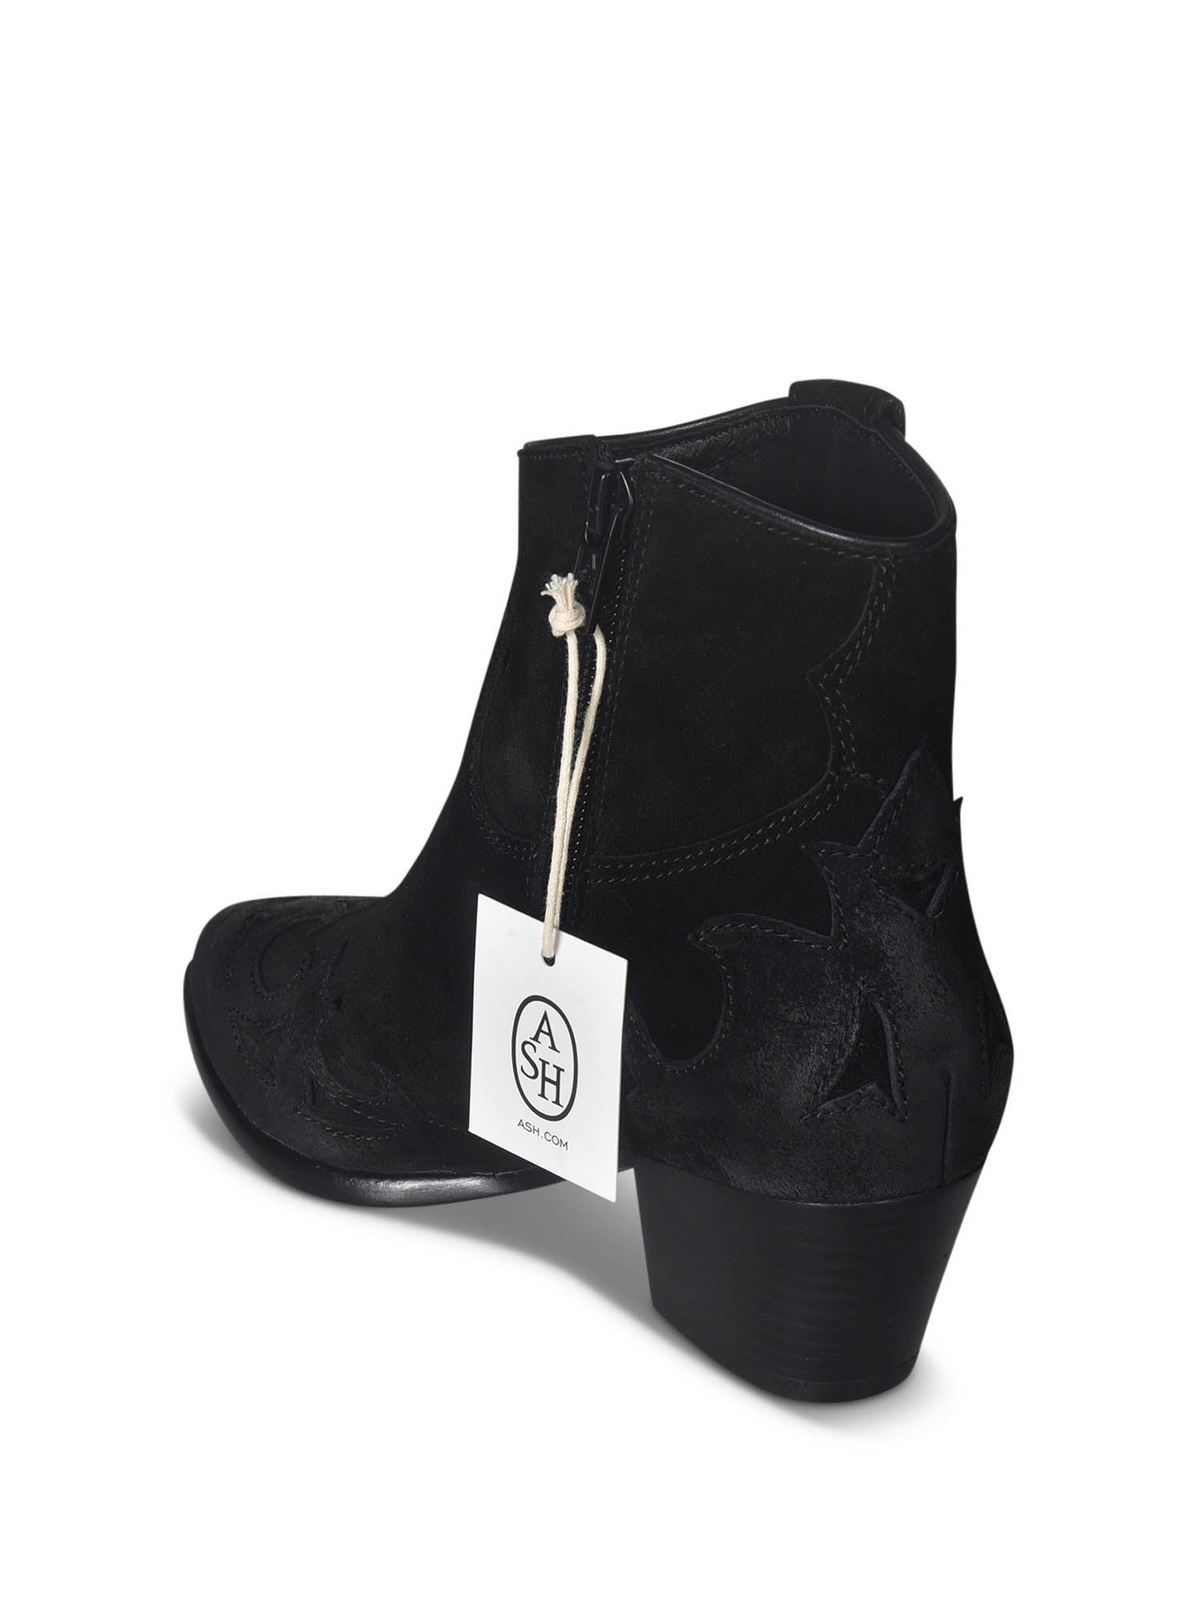 harlow ankle boots